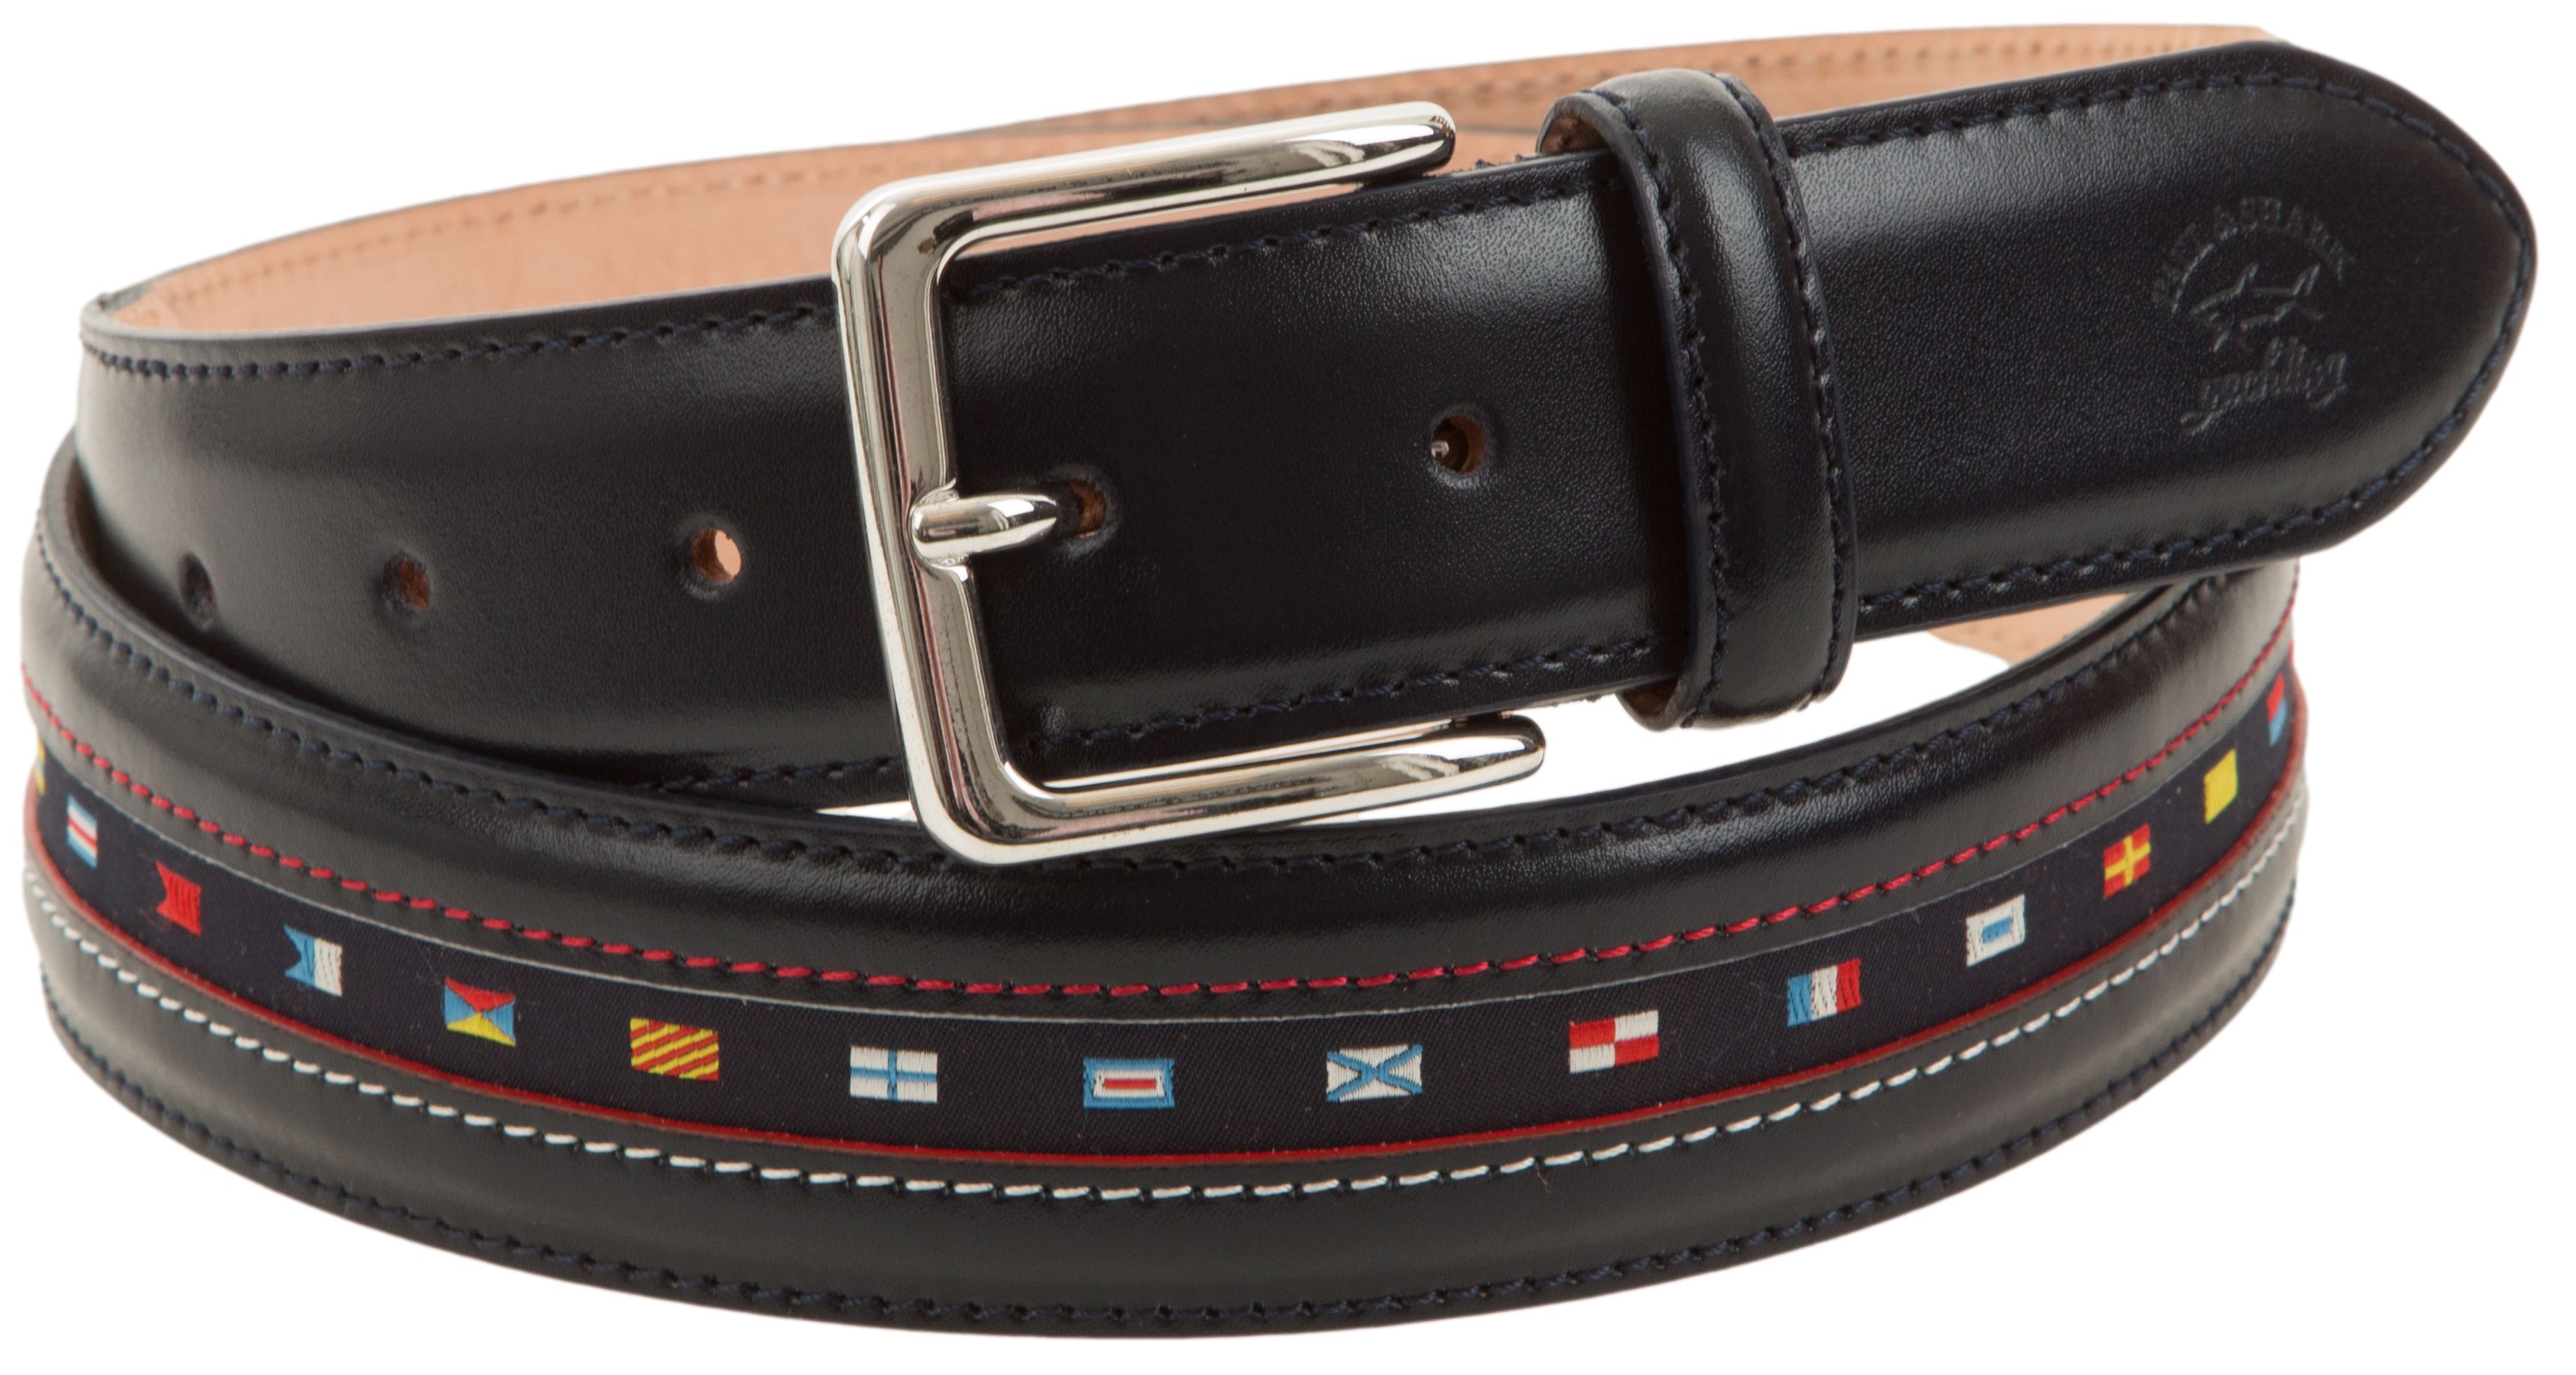 Paul & Shark - Leather belt with nautical flags